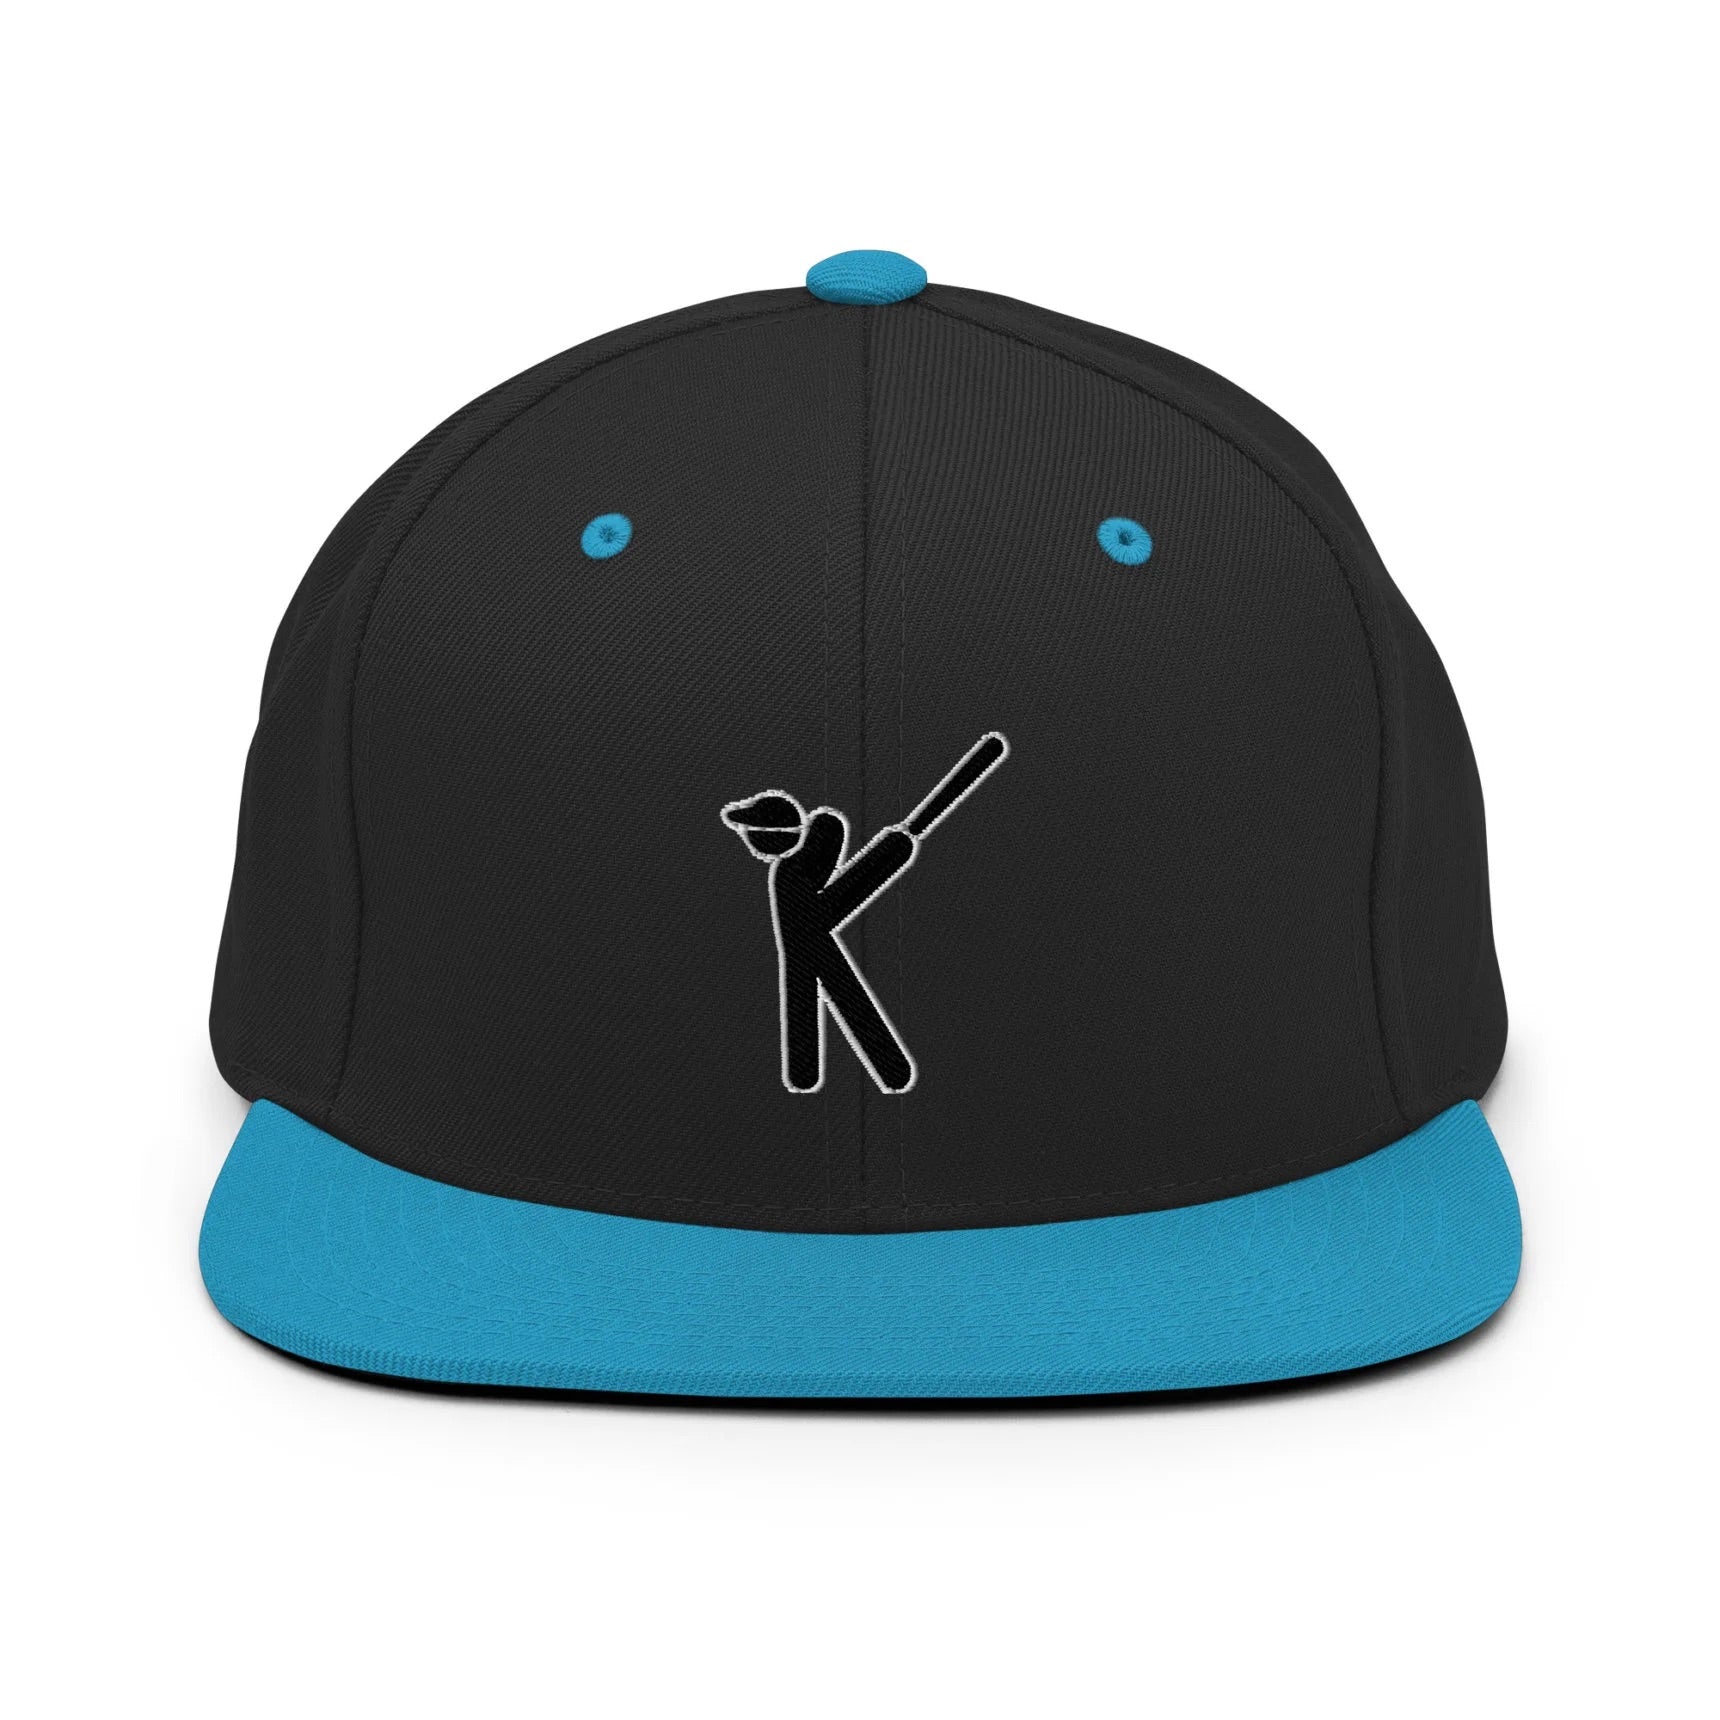 Kasabe ShowZone snapback hat in black with blue brim and accents